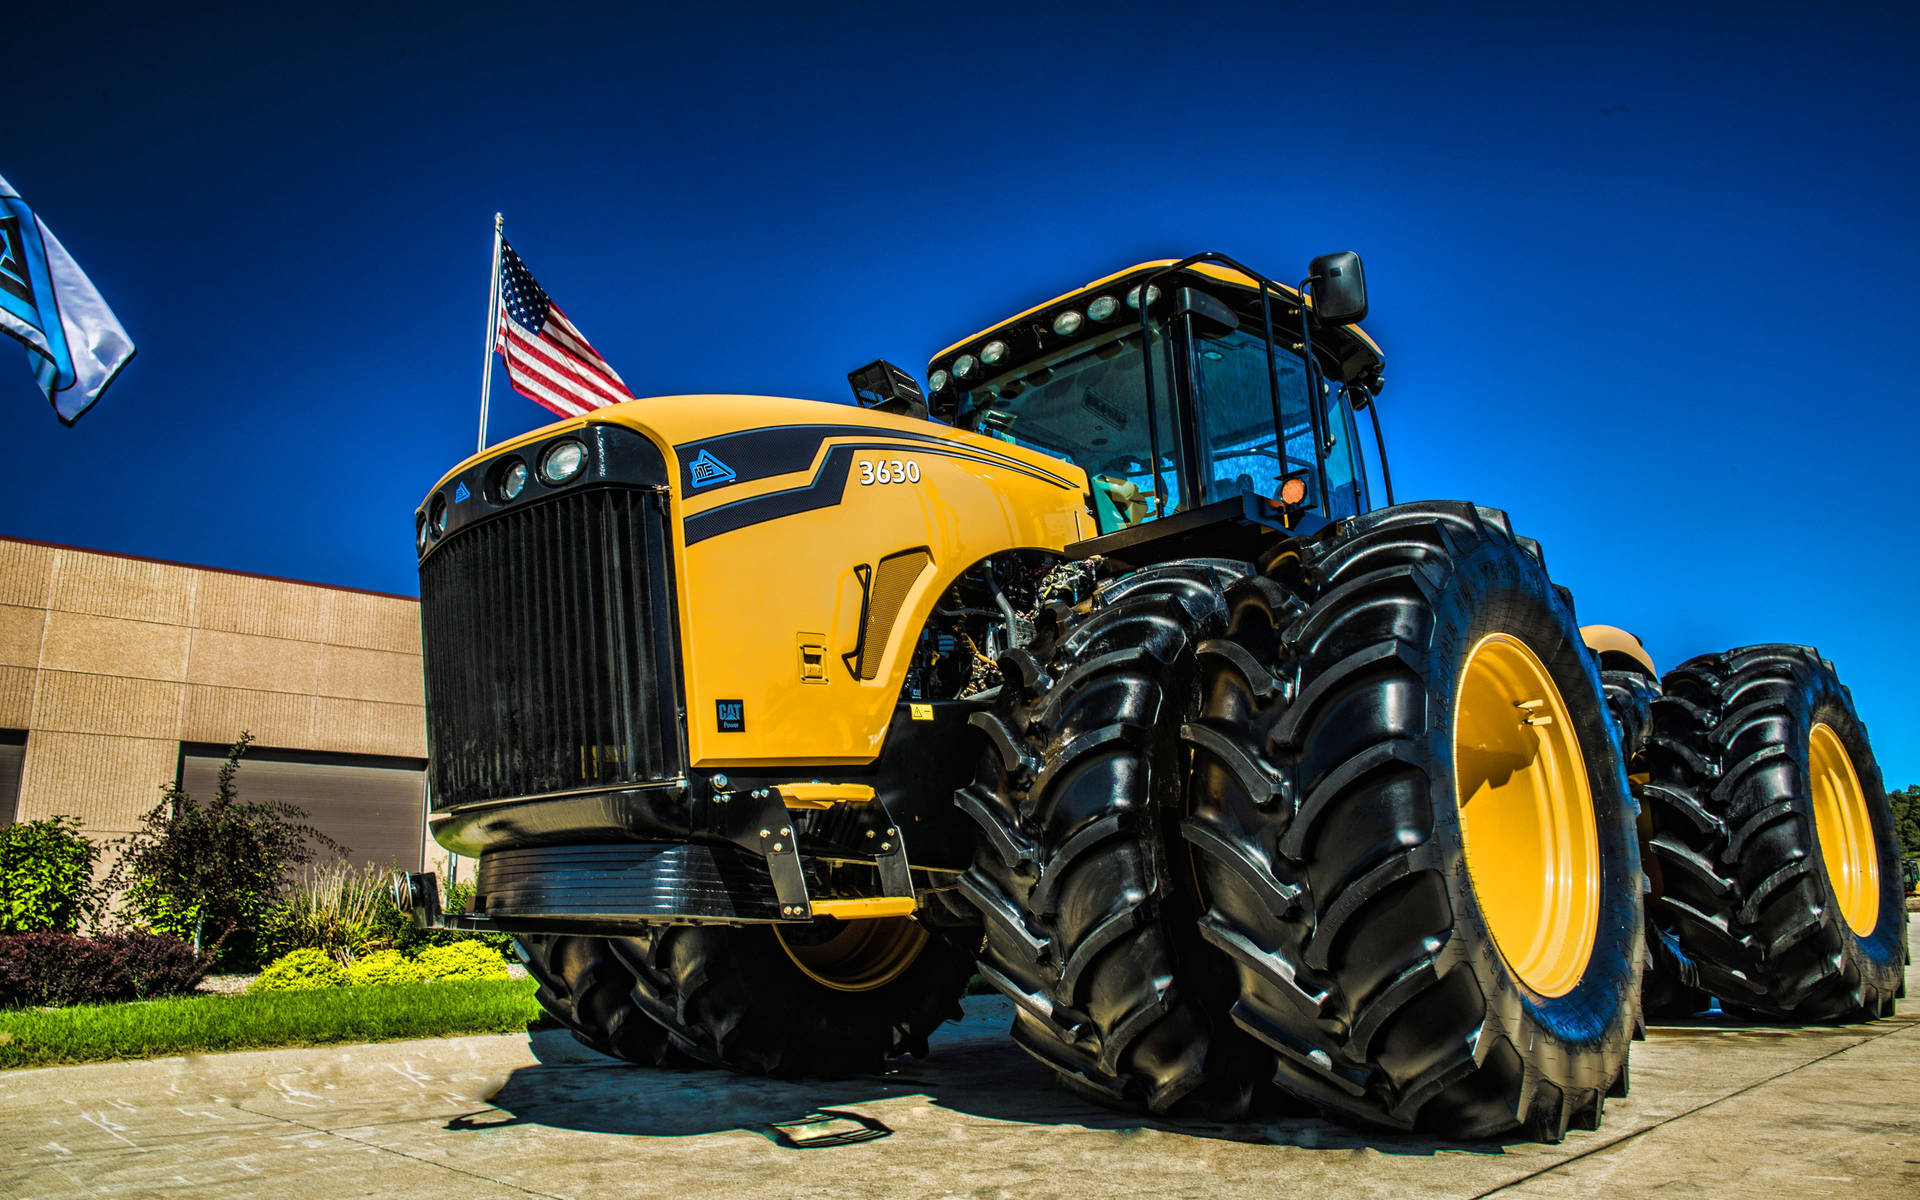 Yellow Mts Cat 3630 Tractor Background